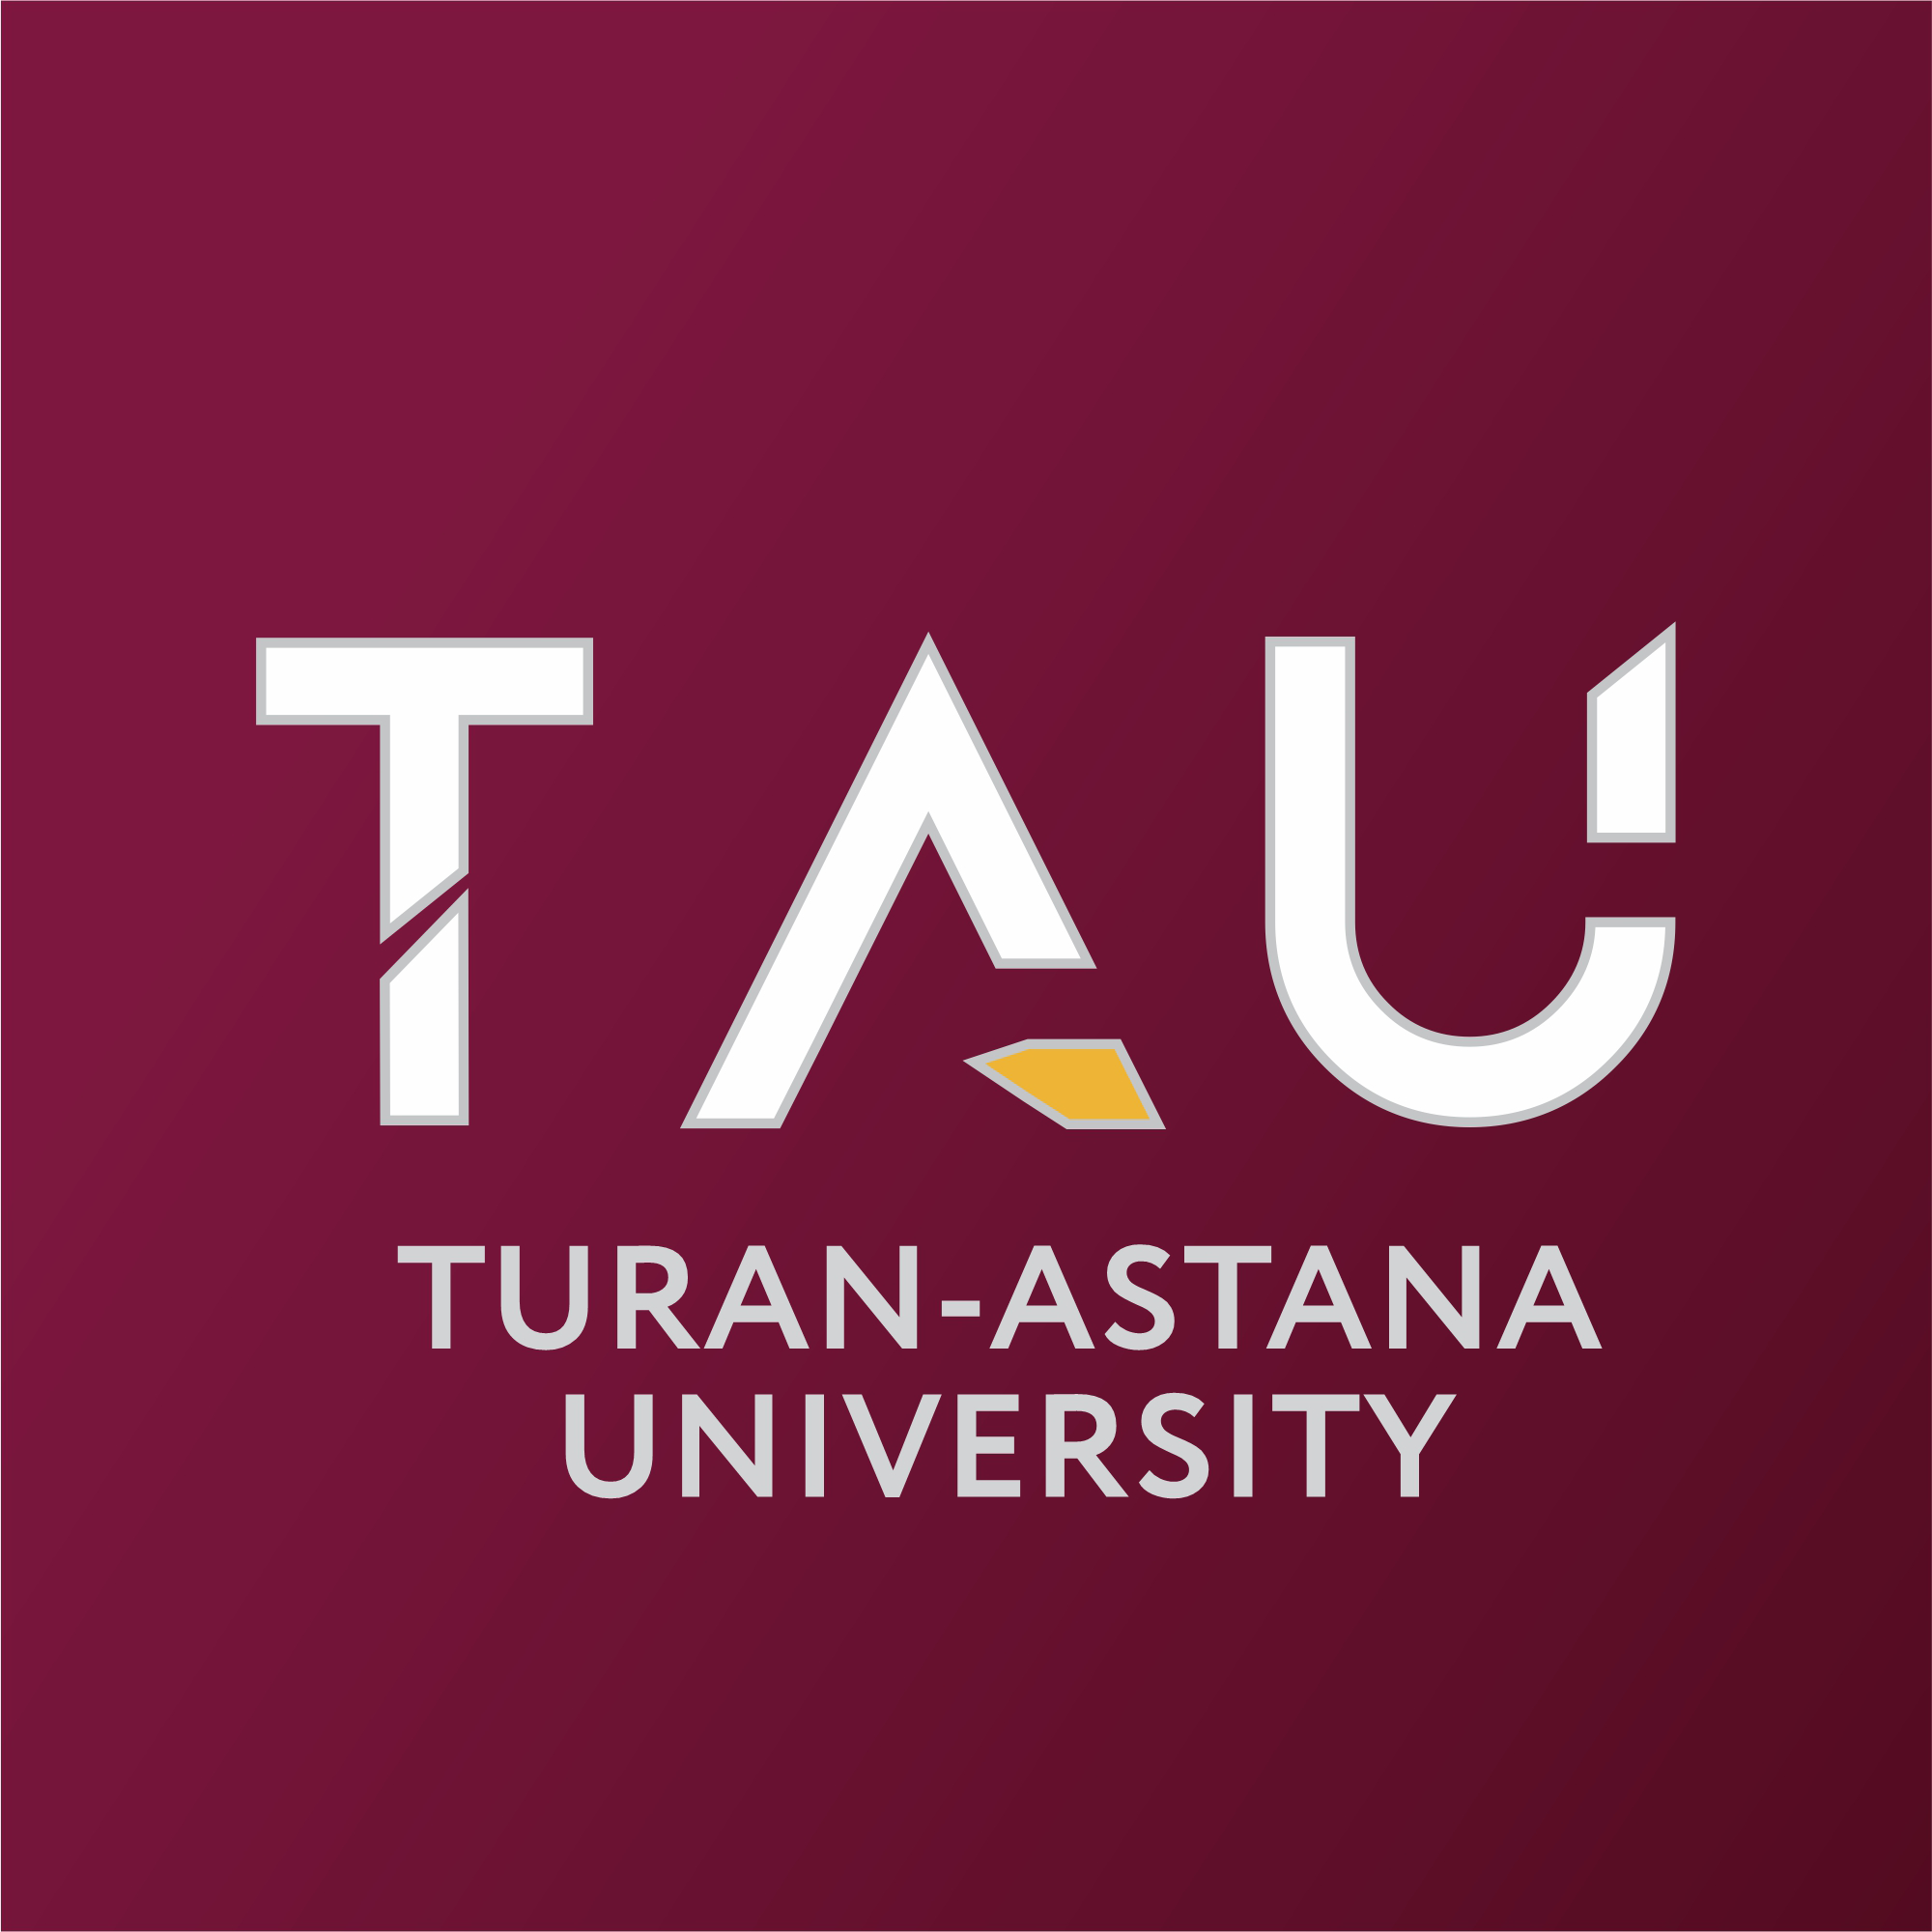 Turan-Astana University announces enrollment for the external academic mobility program in partner universities in the countries of the Eurasian Union and Eastern Europe, funded by the Ministry of Science and Higher Education of the Republic of Kazakhstan